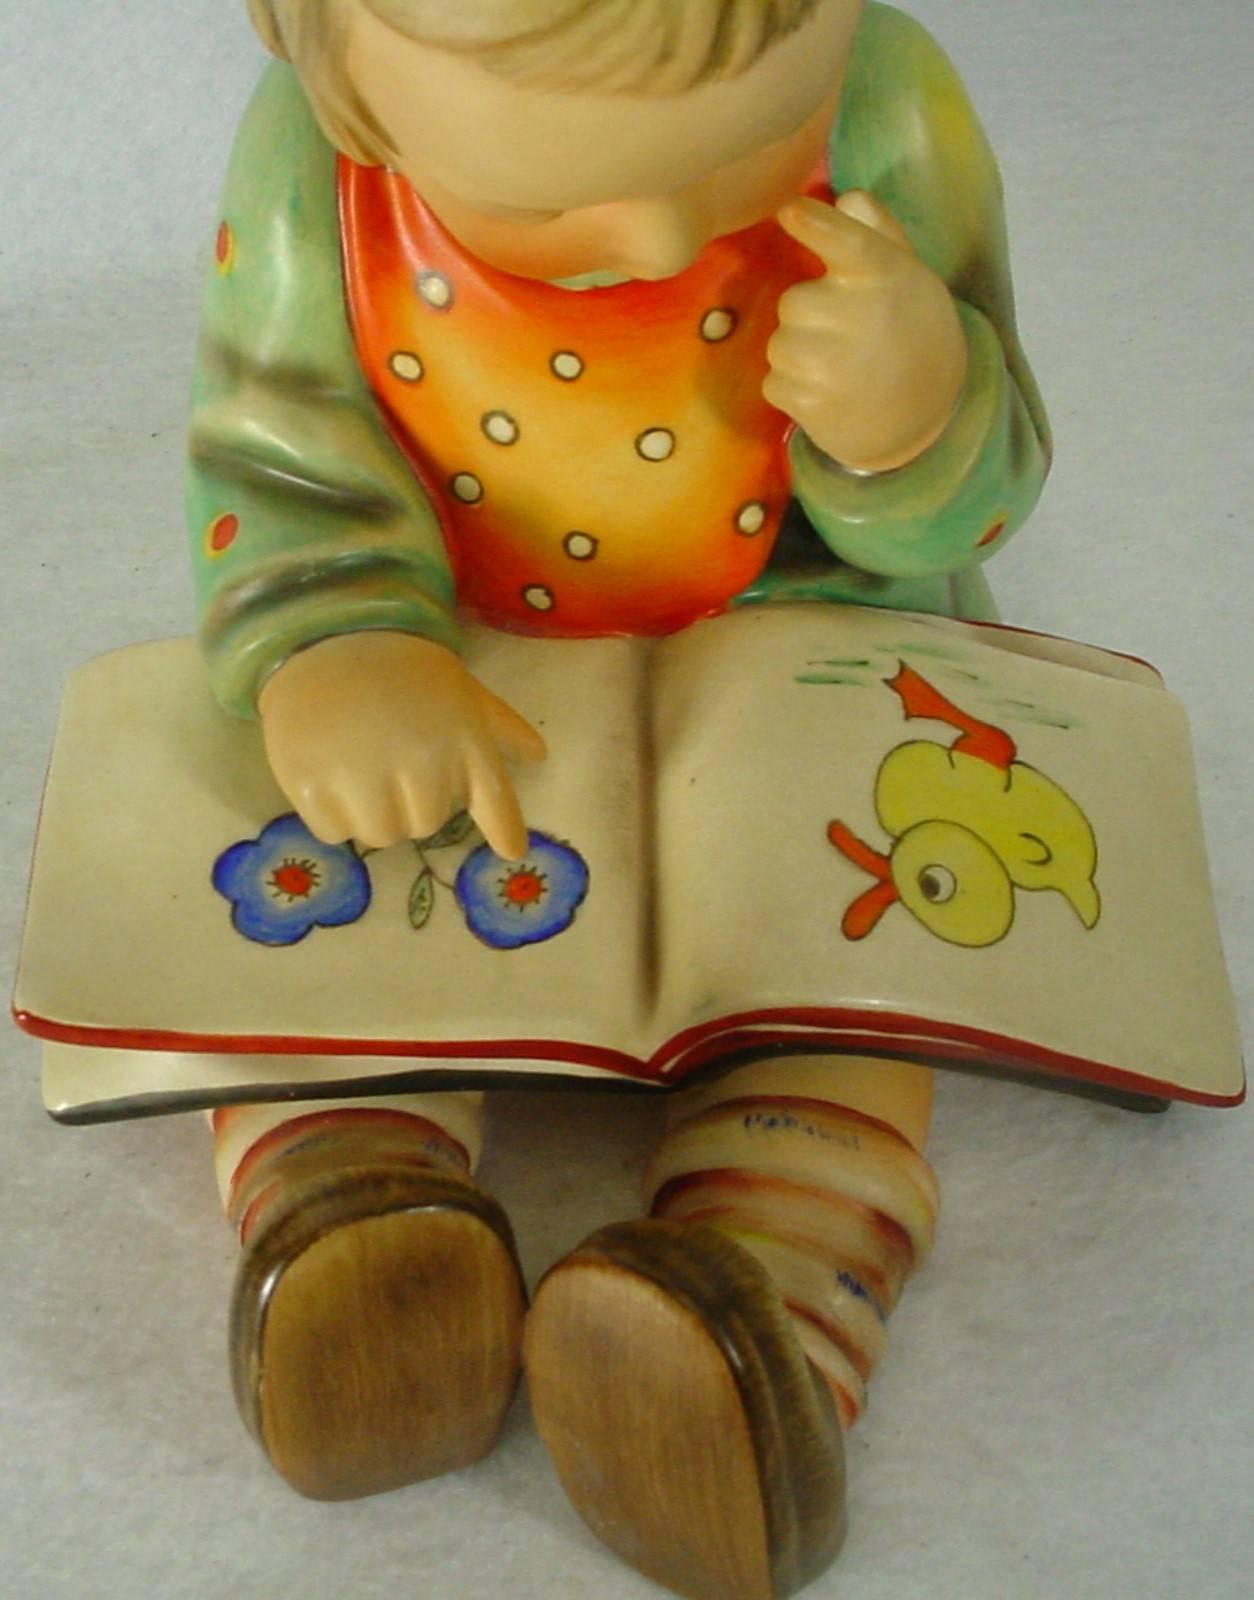 Hummel figurine book worm 3/III trademark 4

in great condition free-from chips, cracks, breaks, stains or discoloration and with only a minimum of use. 

Production dates: Unknown. 

Measures: 8